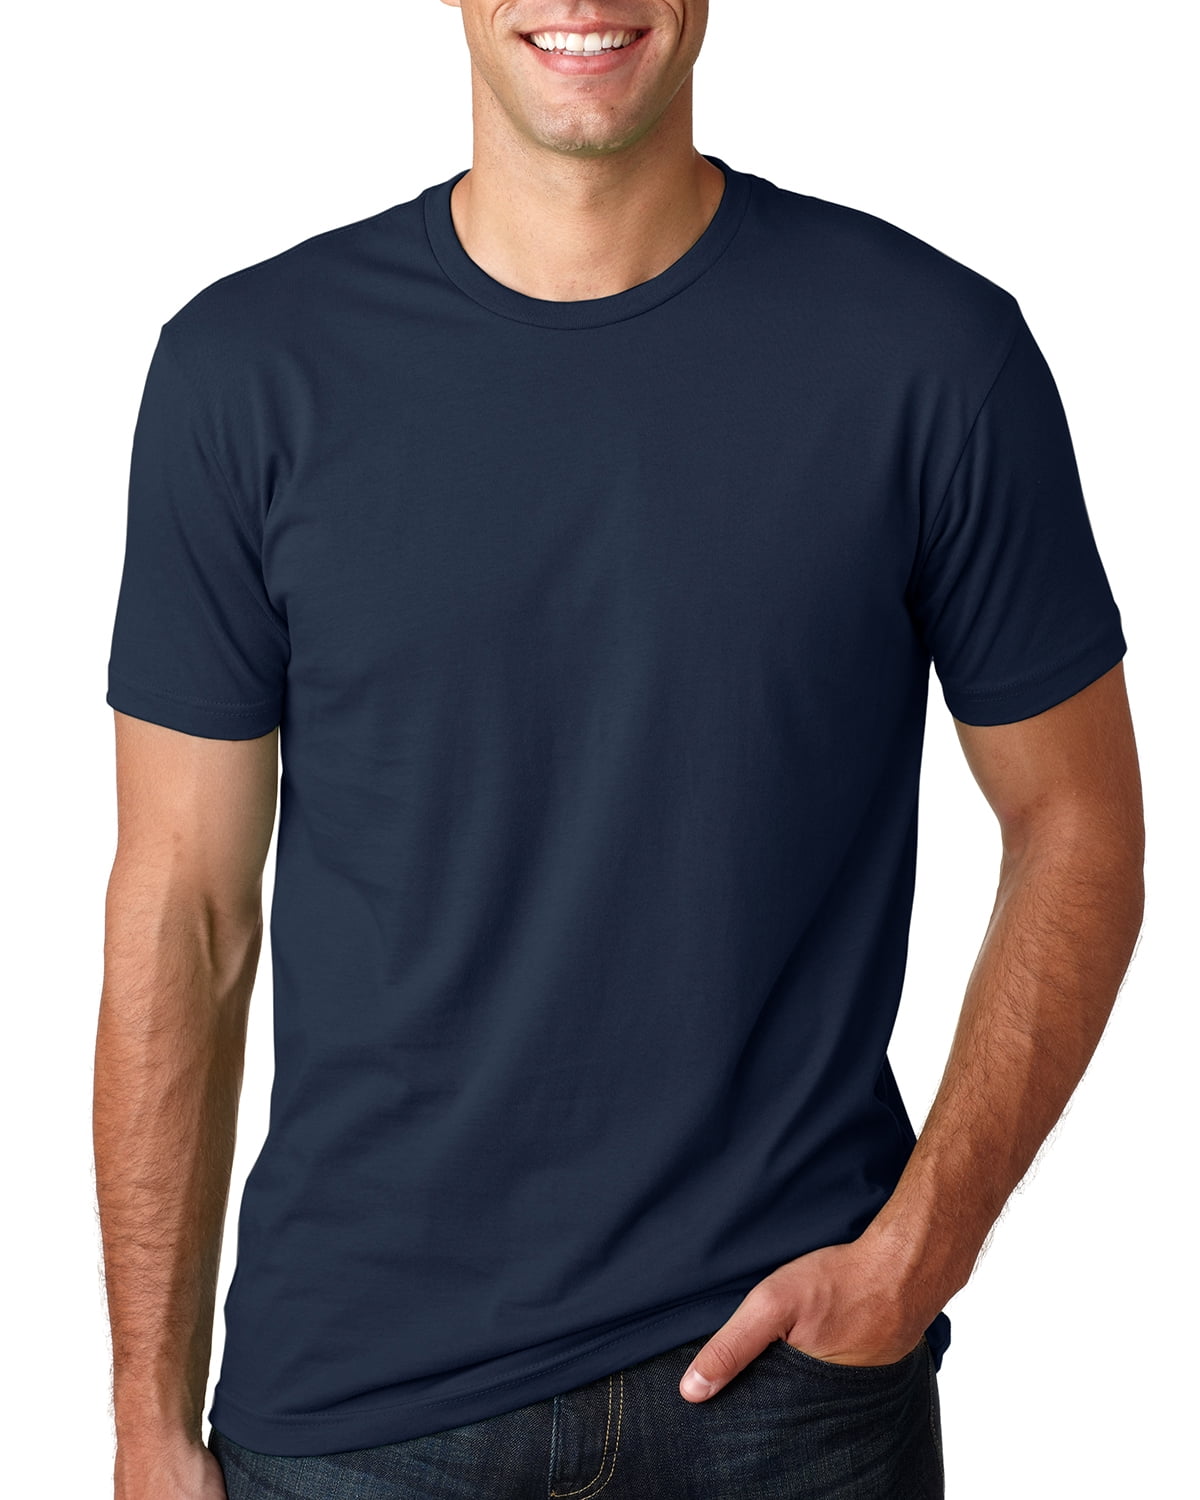 Midnight Navy XX-Large Next Level Mens Premium Fitted Short Sleeve V-Neck Tee